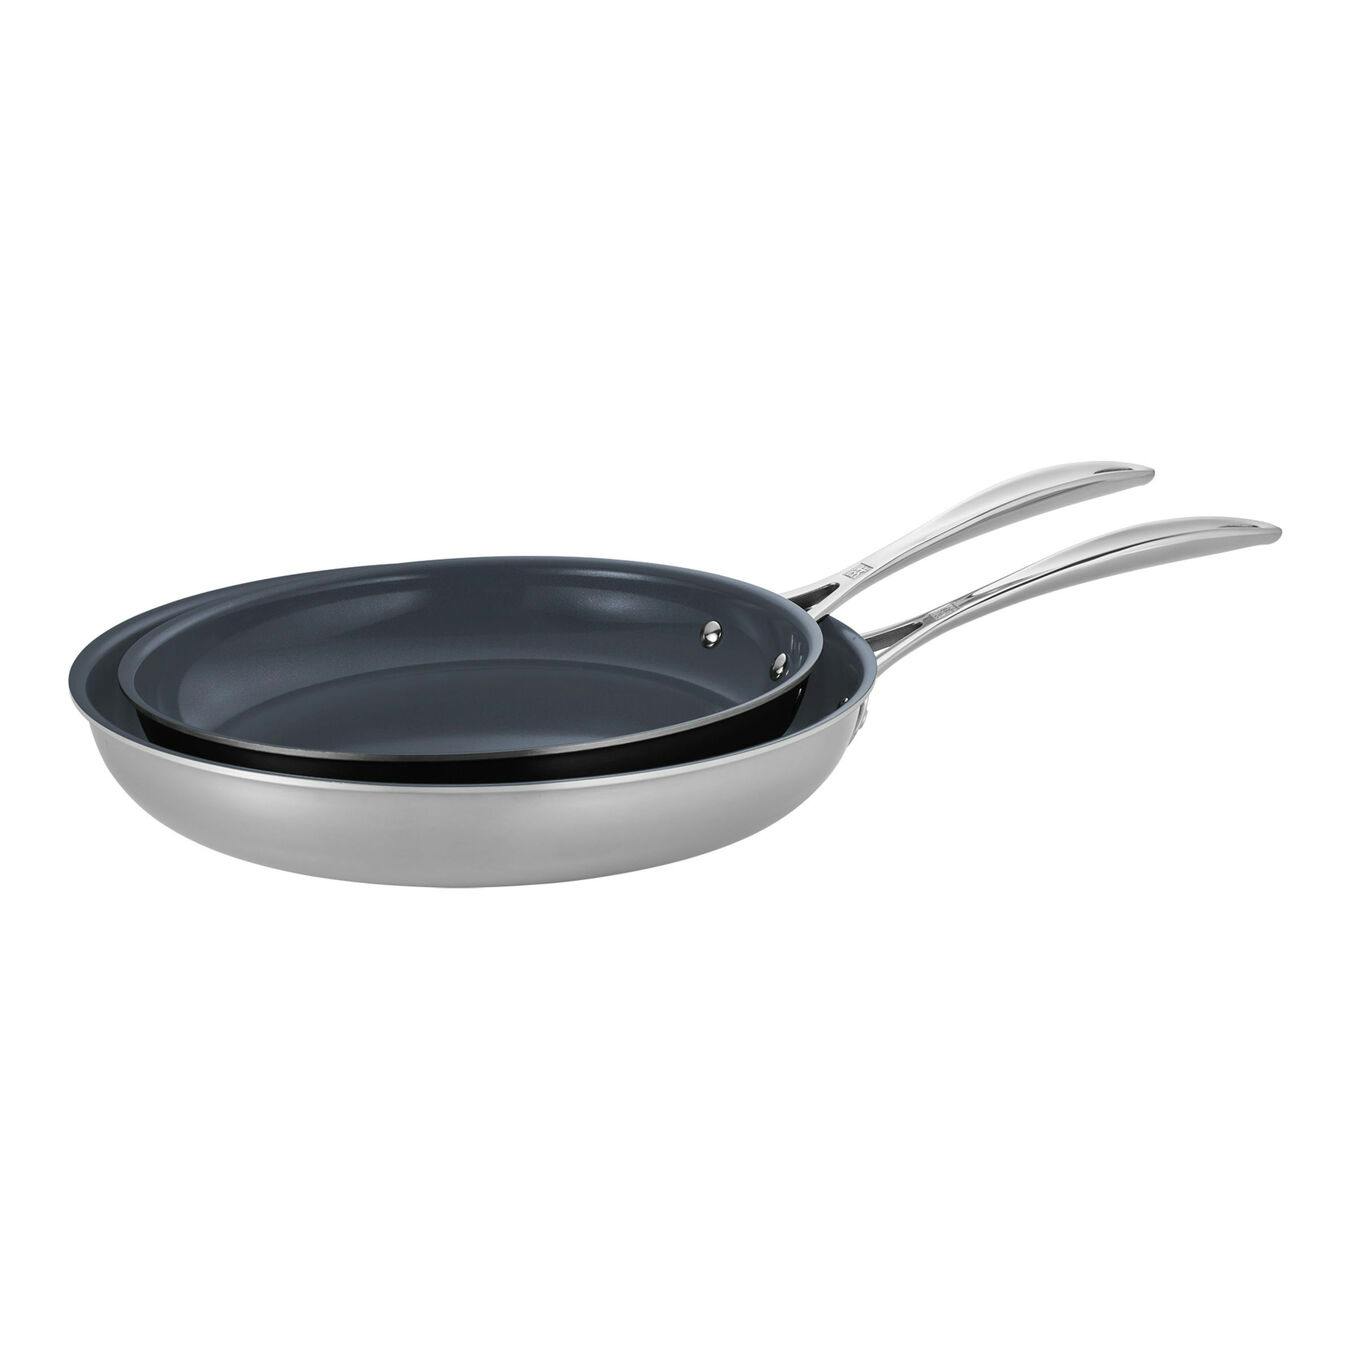 Zwilling Clad CFX 2-Pc Stainless Steel Ceramic Nonstick 10-In & 12-In Fry Pan Set